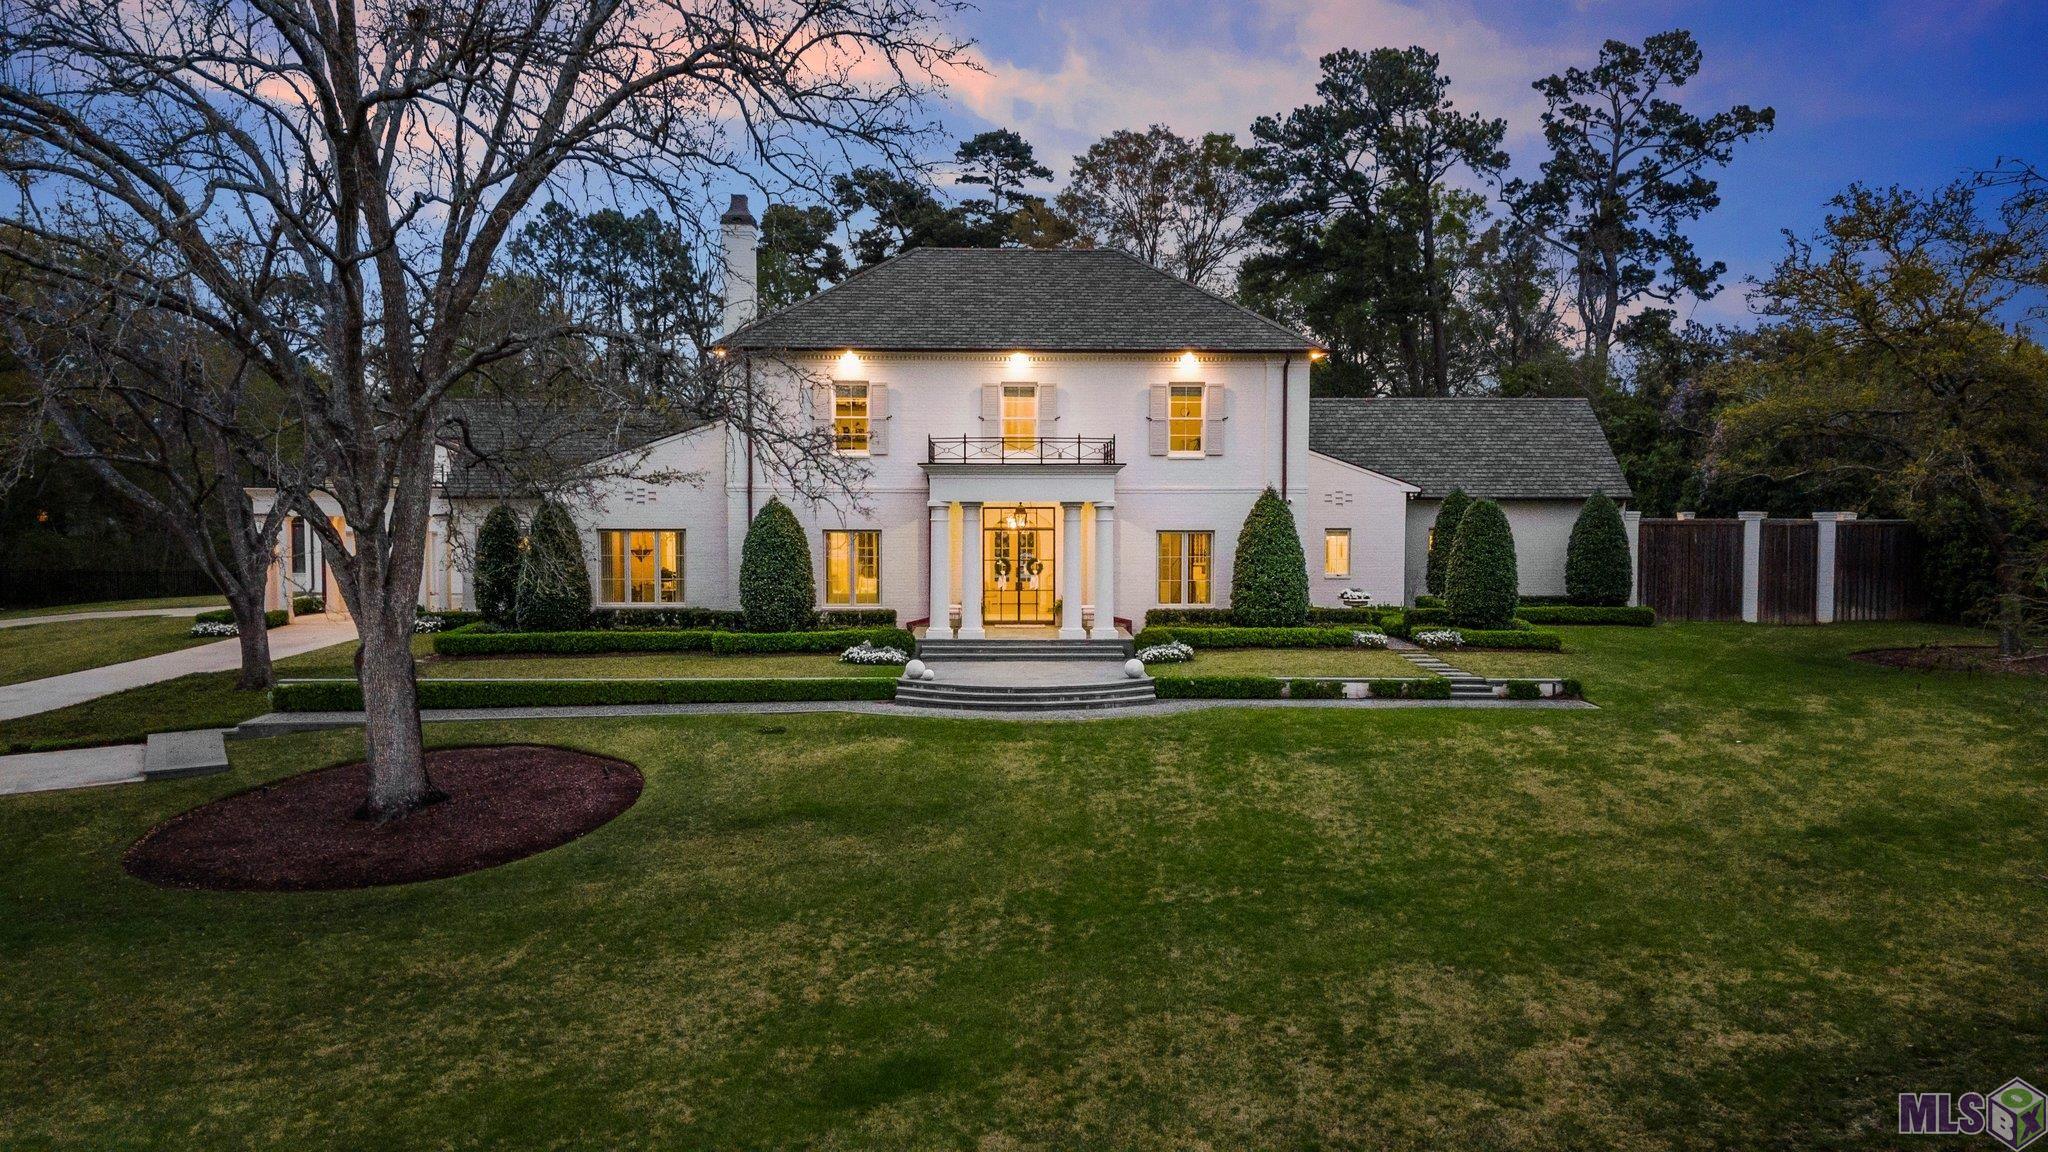 One of Baton Rouge’s most luxurious and stunning estates that was custom built in 2018. This home sits on 1.75 rolling acres in the middle of town in the highly sought after Southdowns/ Meadow Lea area and graced the cover of Traditional Home magazine in 2023. No expense was spared building this one of a kind beautiful home, designed by Hoffpauir Studio Architects, built by Bernhard Normand Construction and decorated by Colleen Waguespack of CW Interiors. Custom made steel and glass front doors from Chateau Dominque in Houston, TX welcomes guests to take in every exquisite detail inside. 4 bedrooms, 5 ½ bathrooms. Large foyer with custom iron curved staircase, formal living room, formal dining room w/ high end crystal chandelier , wine room/gentleman’s library or study with climate control steel and glass wine storage unit, stunning long gallery/hall with exposed natural beams, breakfast area, and den/keeping room, . Large kitchen with custom finishes, butler's pantry and top of the line appliances. A unique side sunroom welcomes guests off the porte cochere, office and maildrop area off sunroom, full workout/gym area above garage with full bath and steam shower. Huge master suite with floor to ceiling marble in master bathroom and custom designed master closet. Second floor features 2 BRs, 2 full BAs, w/ a childrens' den/study hall area. Some features include rift cut white oak flooring throughout, Bevelo gas lanterns, 3 car garage,  3 tankless hot water heaters, exterior custom European style landscaping and lighting, 16 zoned irrigation system, Control 4 Smart Home Automation system, built in outdoor kitchen with custom brick pizza oven, heated pool and spa by Russell Pools with expansive bluestone patio and decking, large gas firepit area by pool, huge loggia offering living and dining space, 3 gas fireplaces, mudroom off garage with custom shelving, large three car garage and whole home generator. It’s all in the details. Truly a once in a lifetime opportunity.